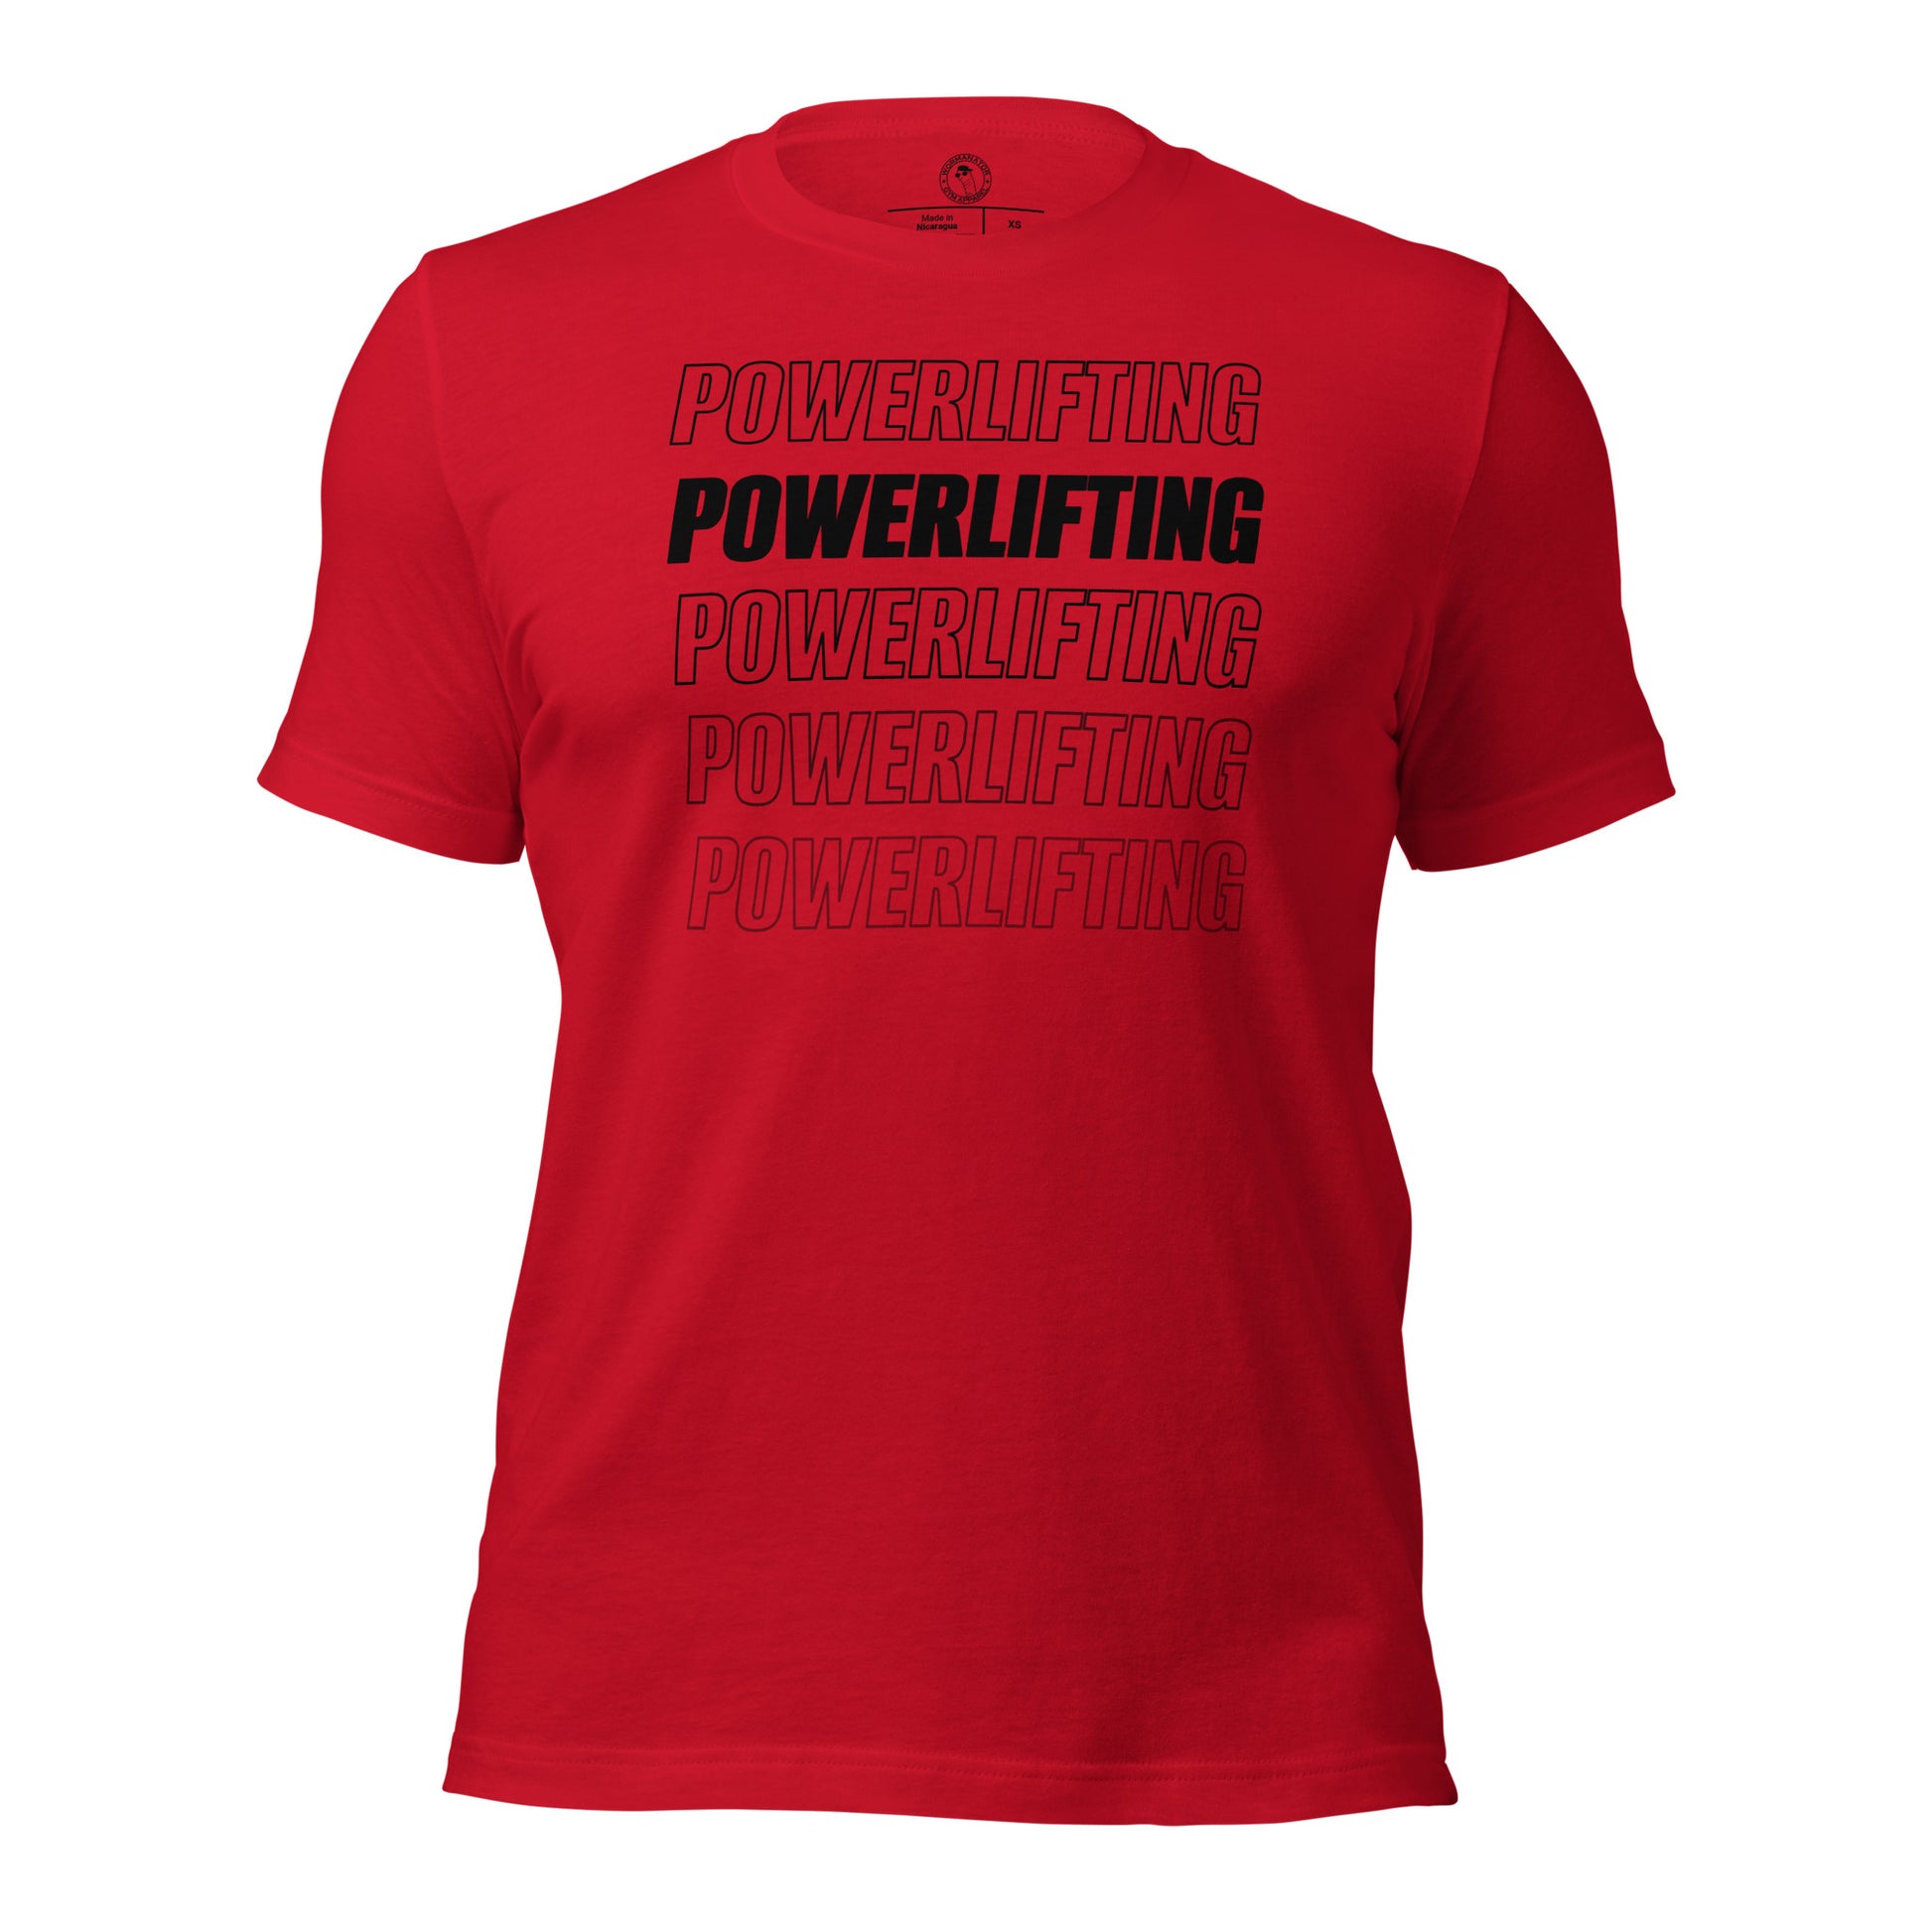 Powerlifting Shirt in Red